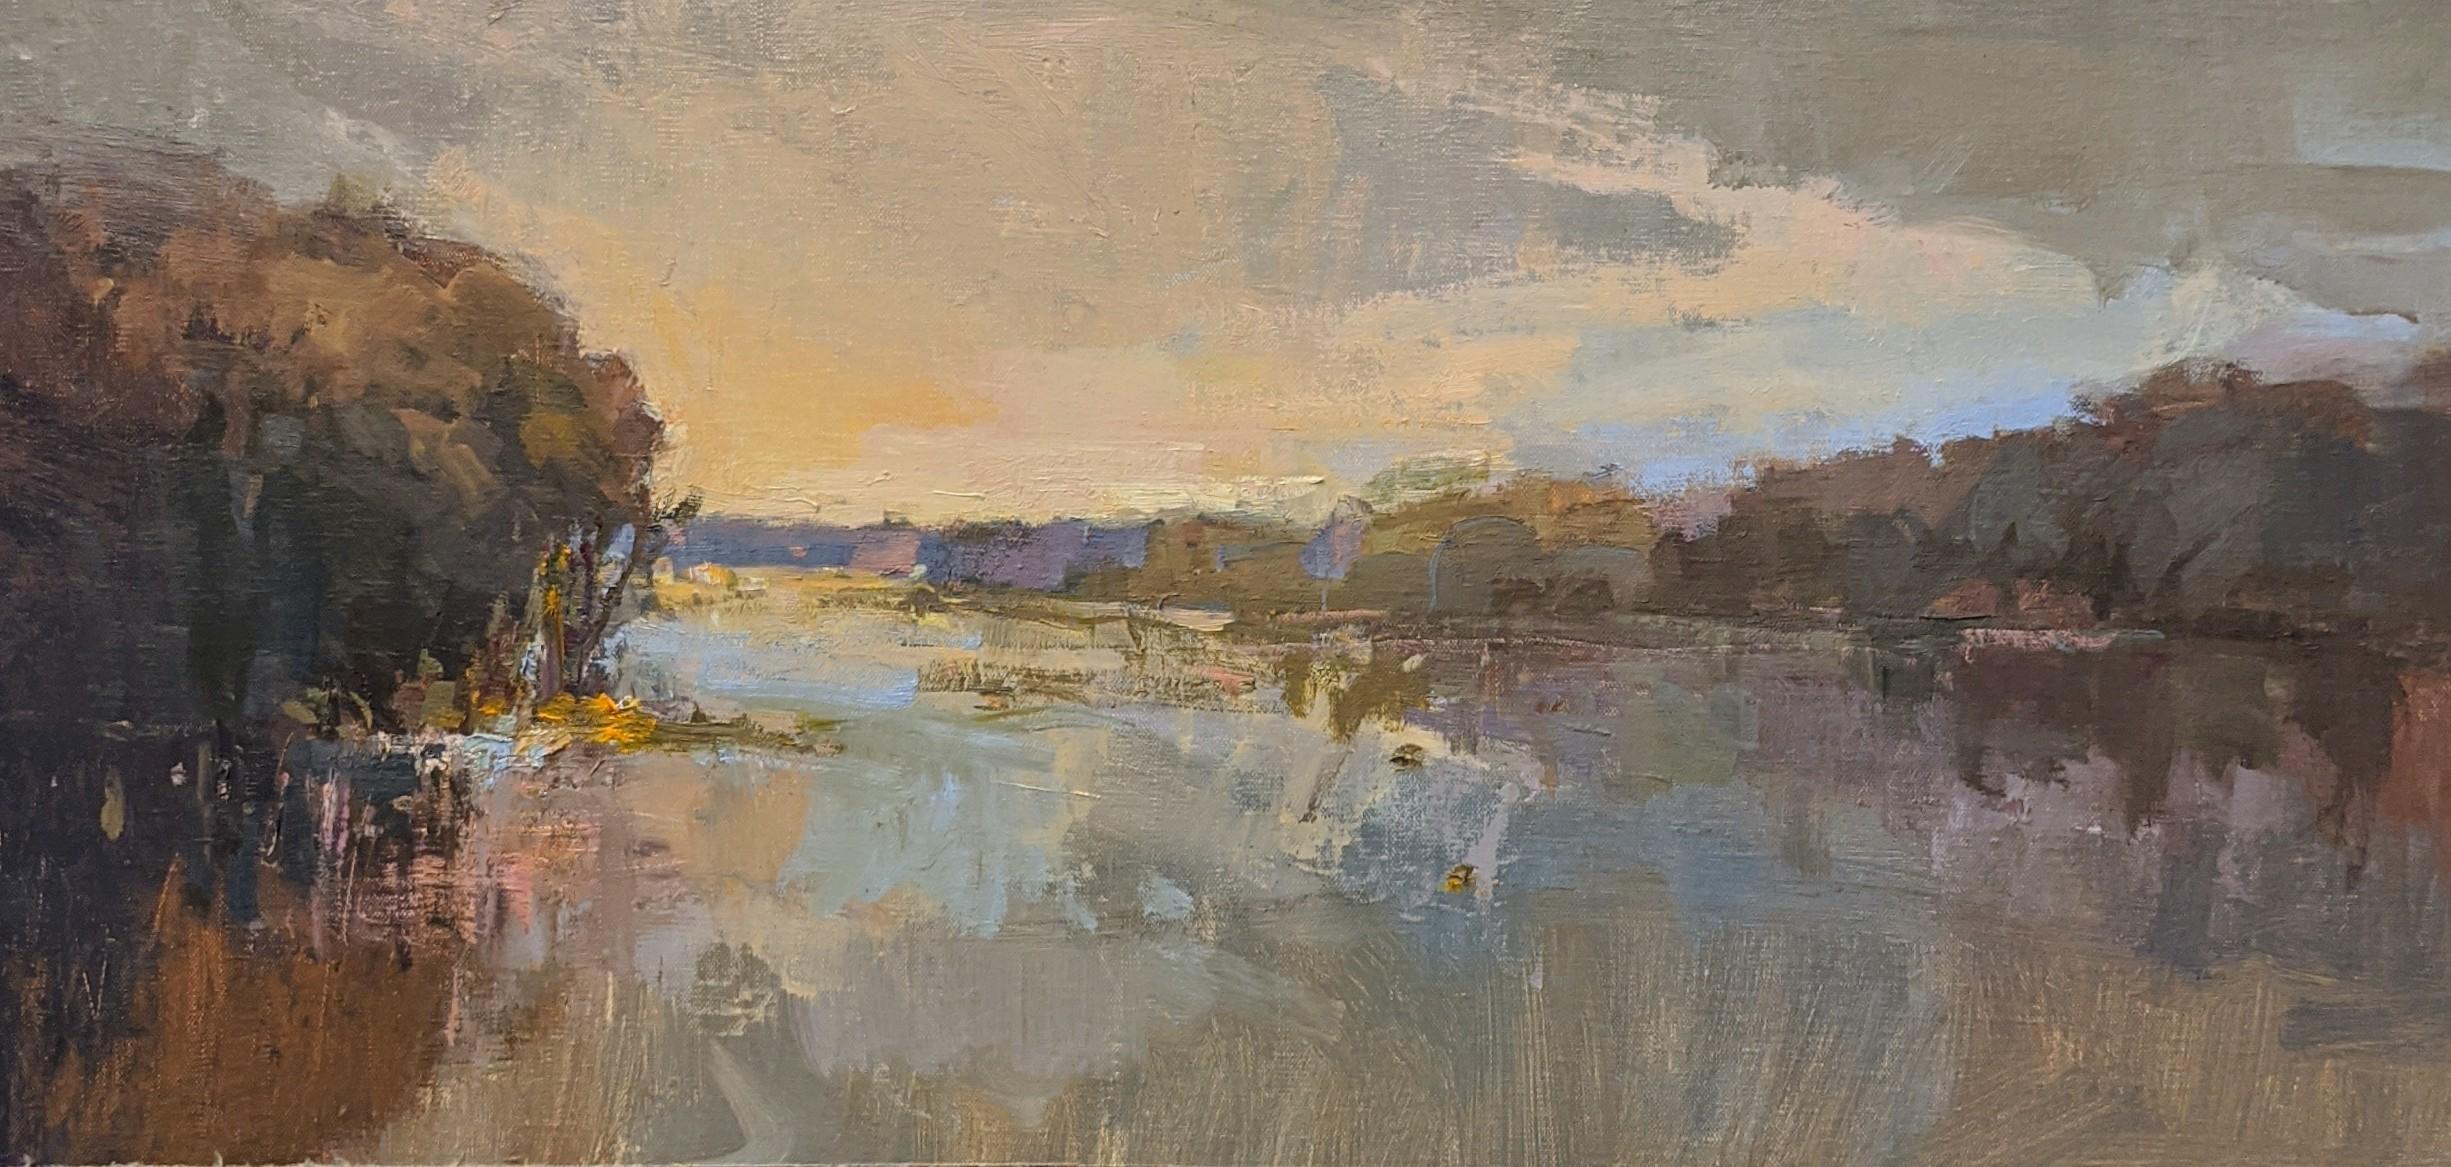 'River's Eve' is a framed Impressionist oil on board plein-air painting of horizontal format, created by American artist Millie Gosch in 2020. Featuring a palette mostly made of blue, orange, green and purple tones, the painting depicts an exquisite